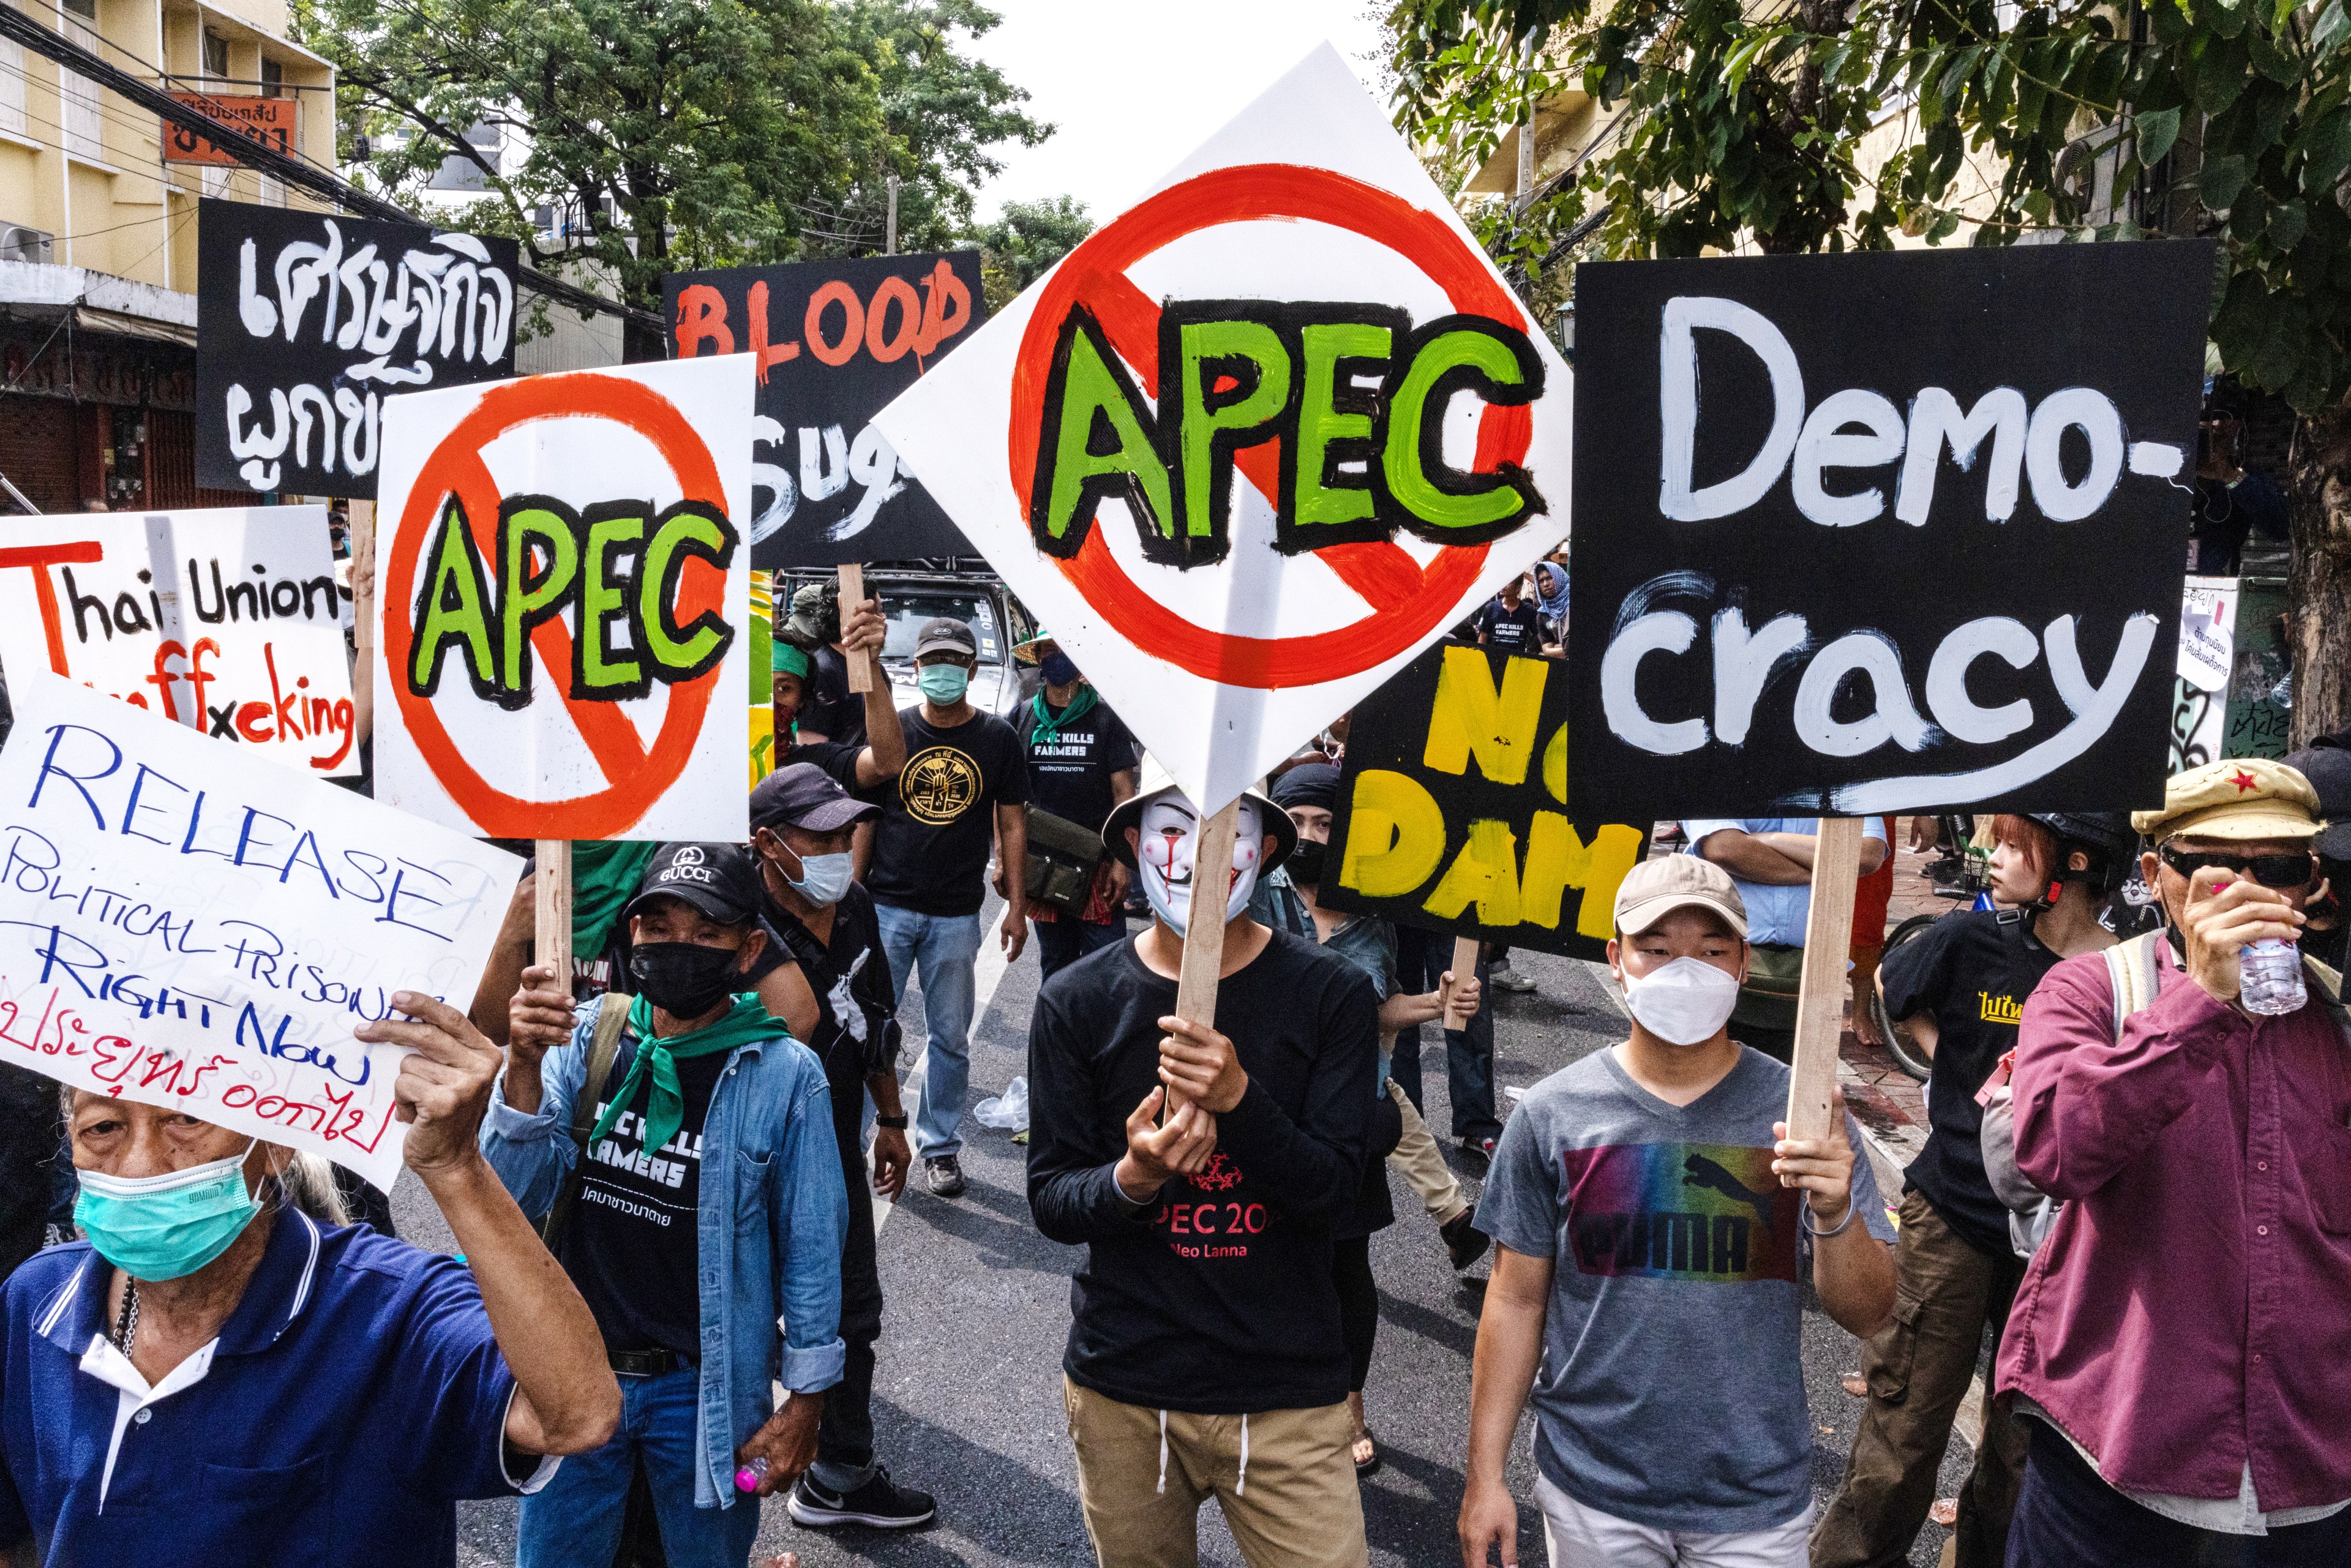 Dozens of people wearing COVID face mask stand closely together in the middle of a street in Bangkok, Thailand, during an Anti-APEC protest. They are holding signs that read "Democracy" "Release Political Prisoners Right Now" and the acronym "APEC" with a big red circle and strike through the words.